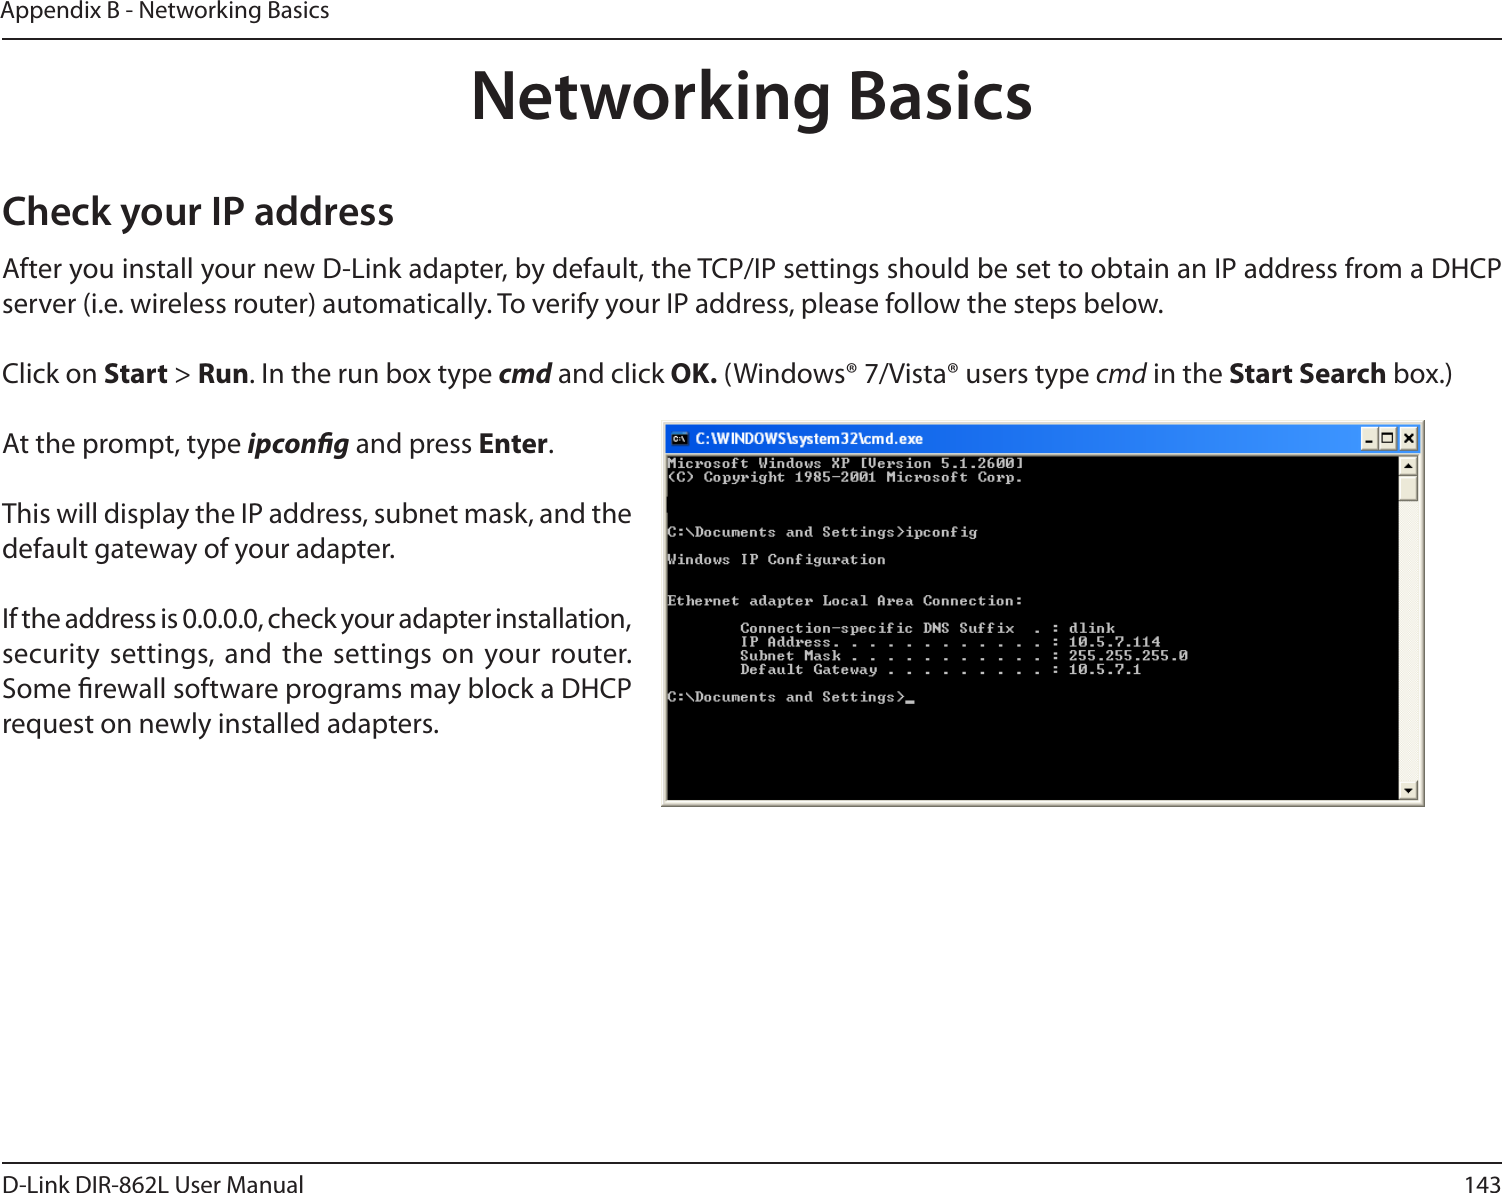 143D-Link DIR-862L User ManualAppendix B - Networking BasicsNetworking BasicsCheck your IP addressAfter you install your new D-Link adapter, by default, the TCP/IP settings should be set to obtain an IP address from a DHCP server (i.e. wireless router) automatically. To verify your IP address, please follow the steps below.Click on Start &gt; Run. In the run box type cmd and click OK. (Windows® 7/Vista® users type cmd in the Start Search box.)At the prompt, type ipcong and press Enter.This will display the IP address, subnet mask, and the default gateway of your adapter.If the address is 0.0.0.0, check your adapter installation, security settings, and the settings on your router. Some rewall software programs may block a DHCP request on newly installed adapters. 